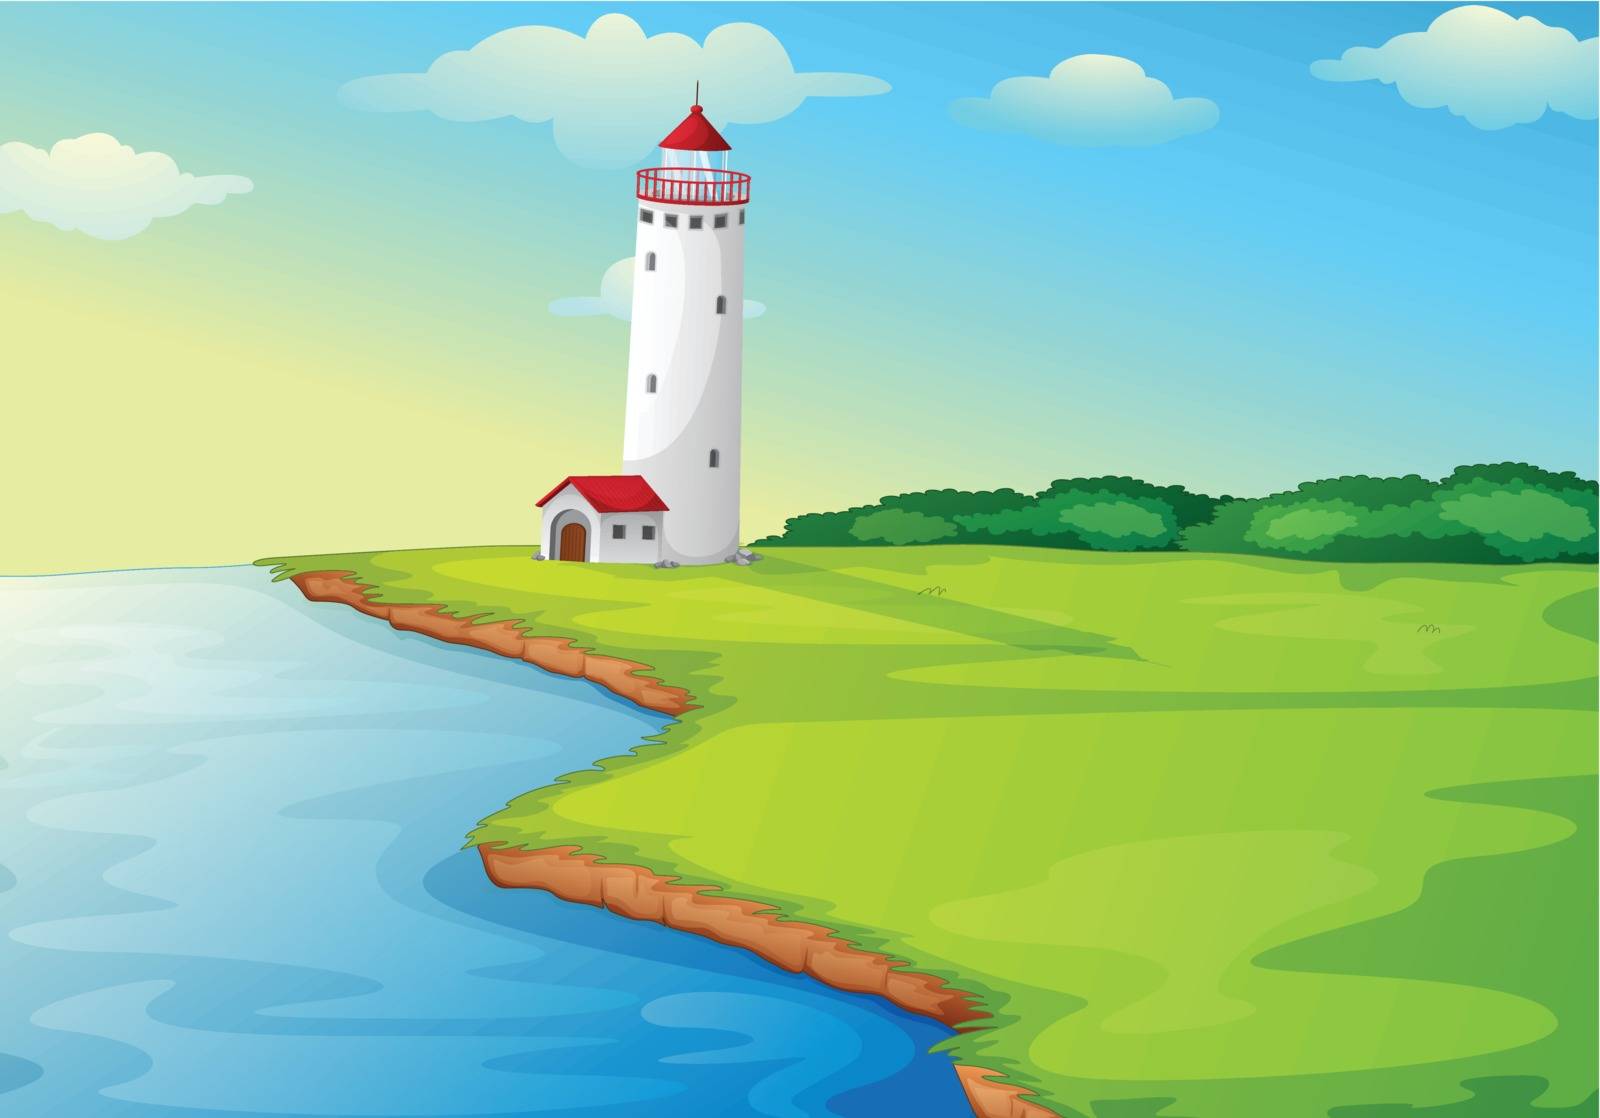 illustration of a light house in a beautiful nature